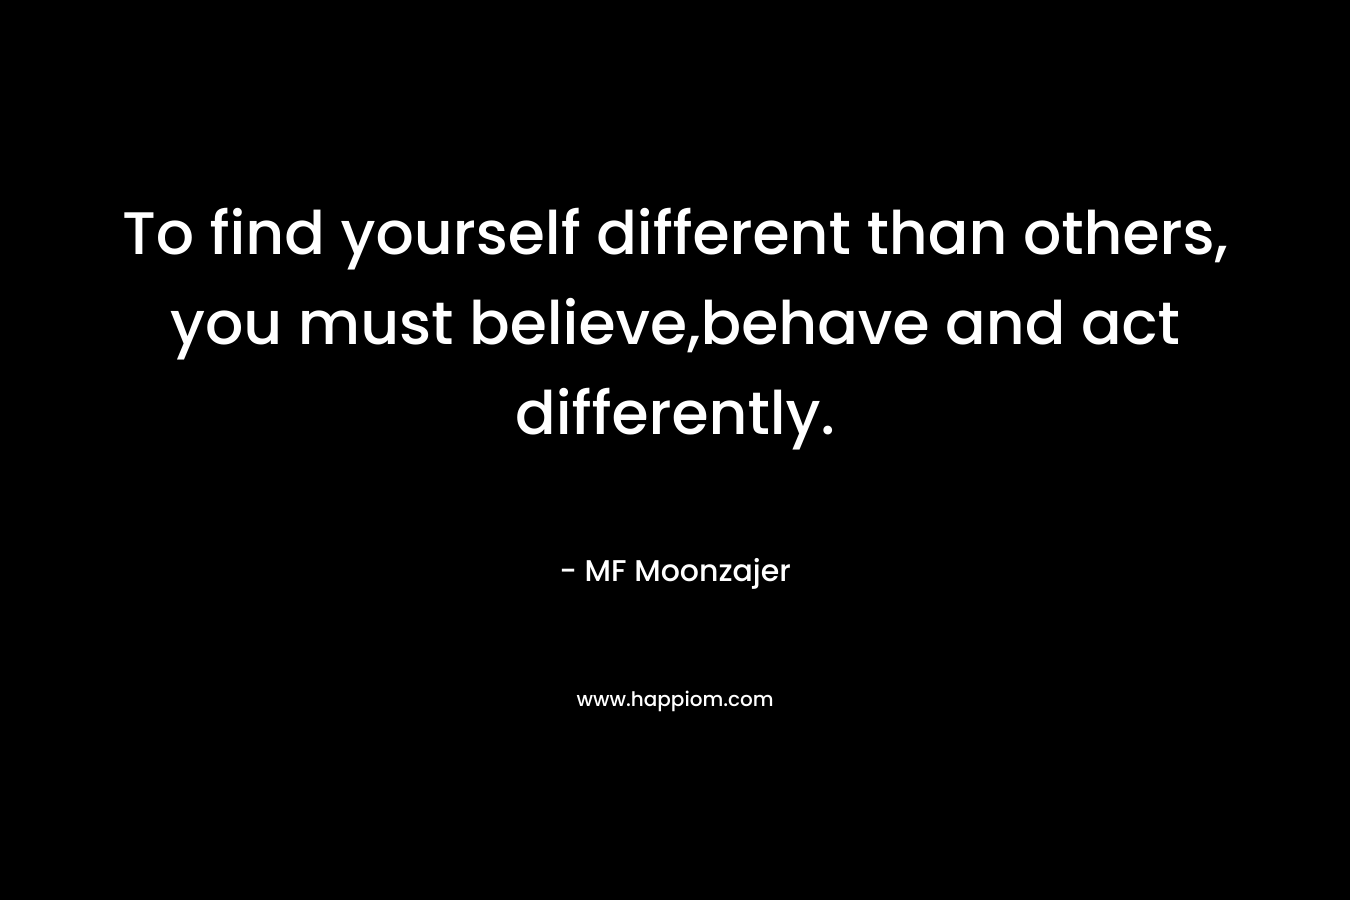 To find yourself different than others, you must believe,behave and act differently.